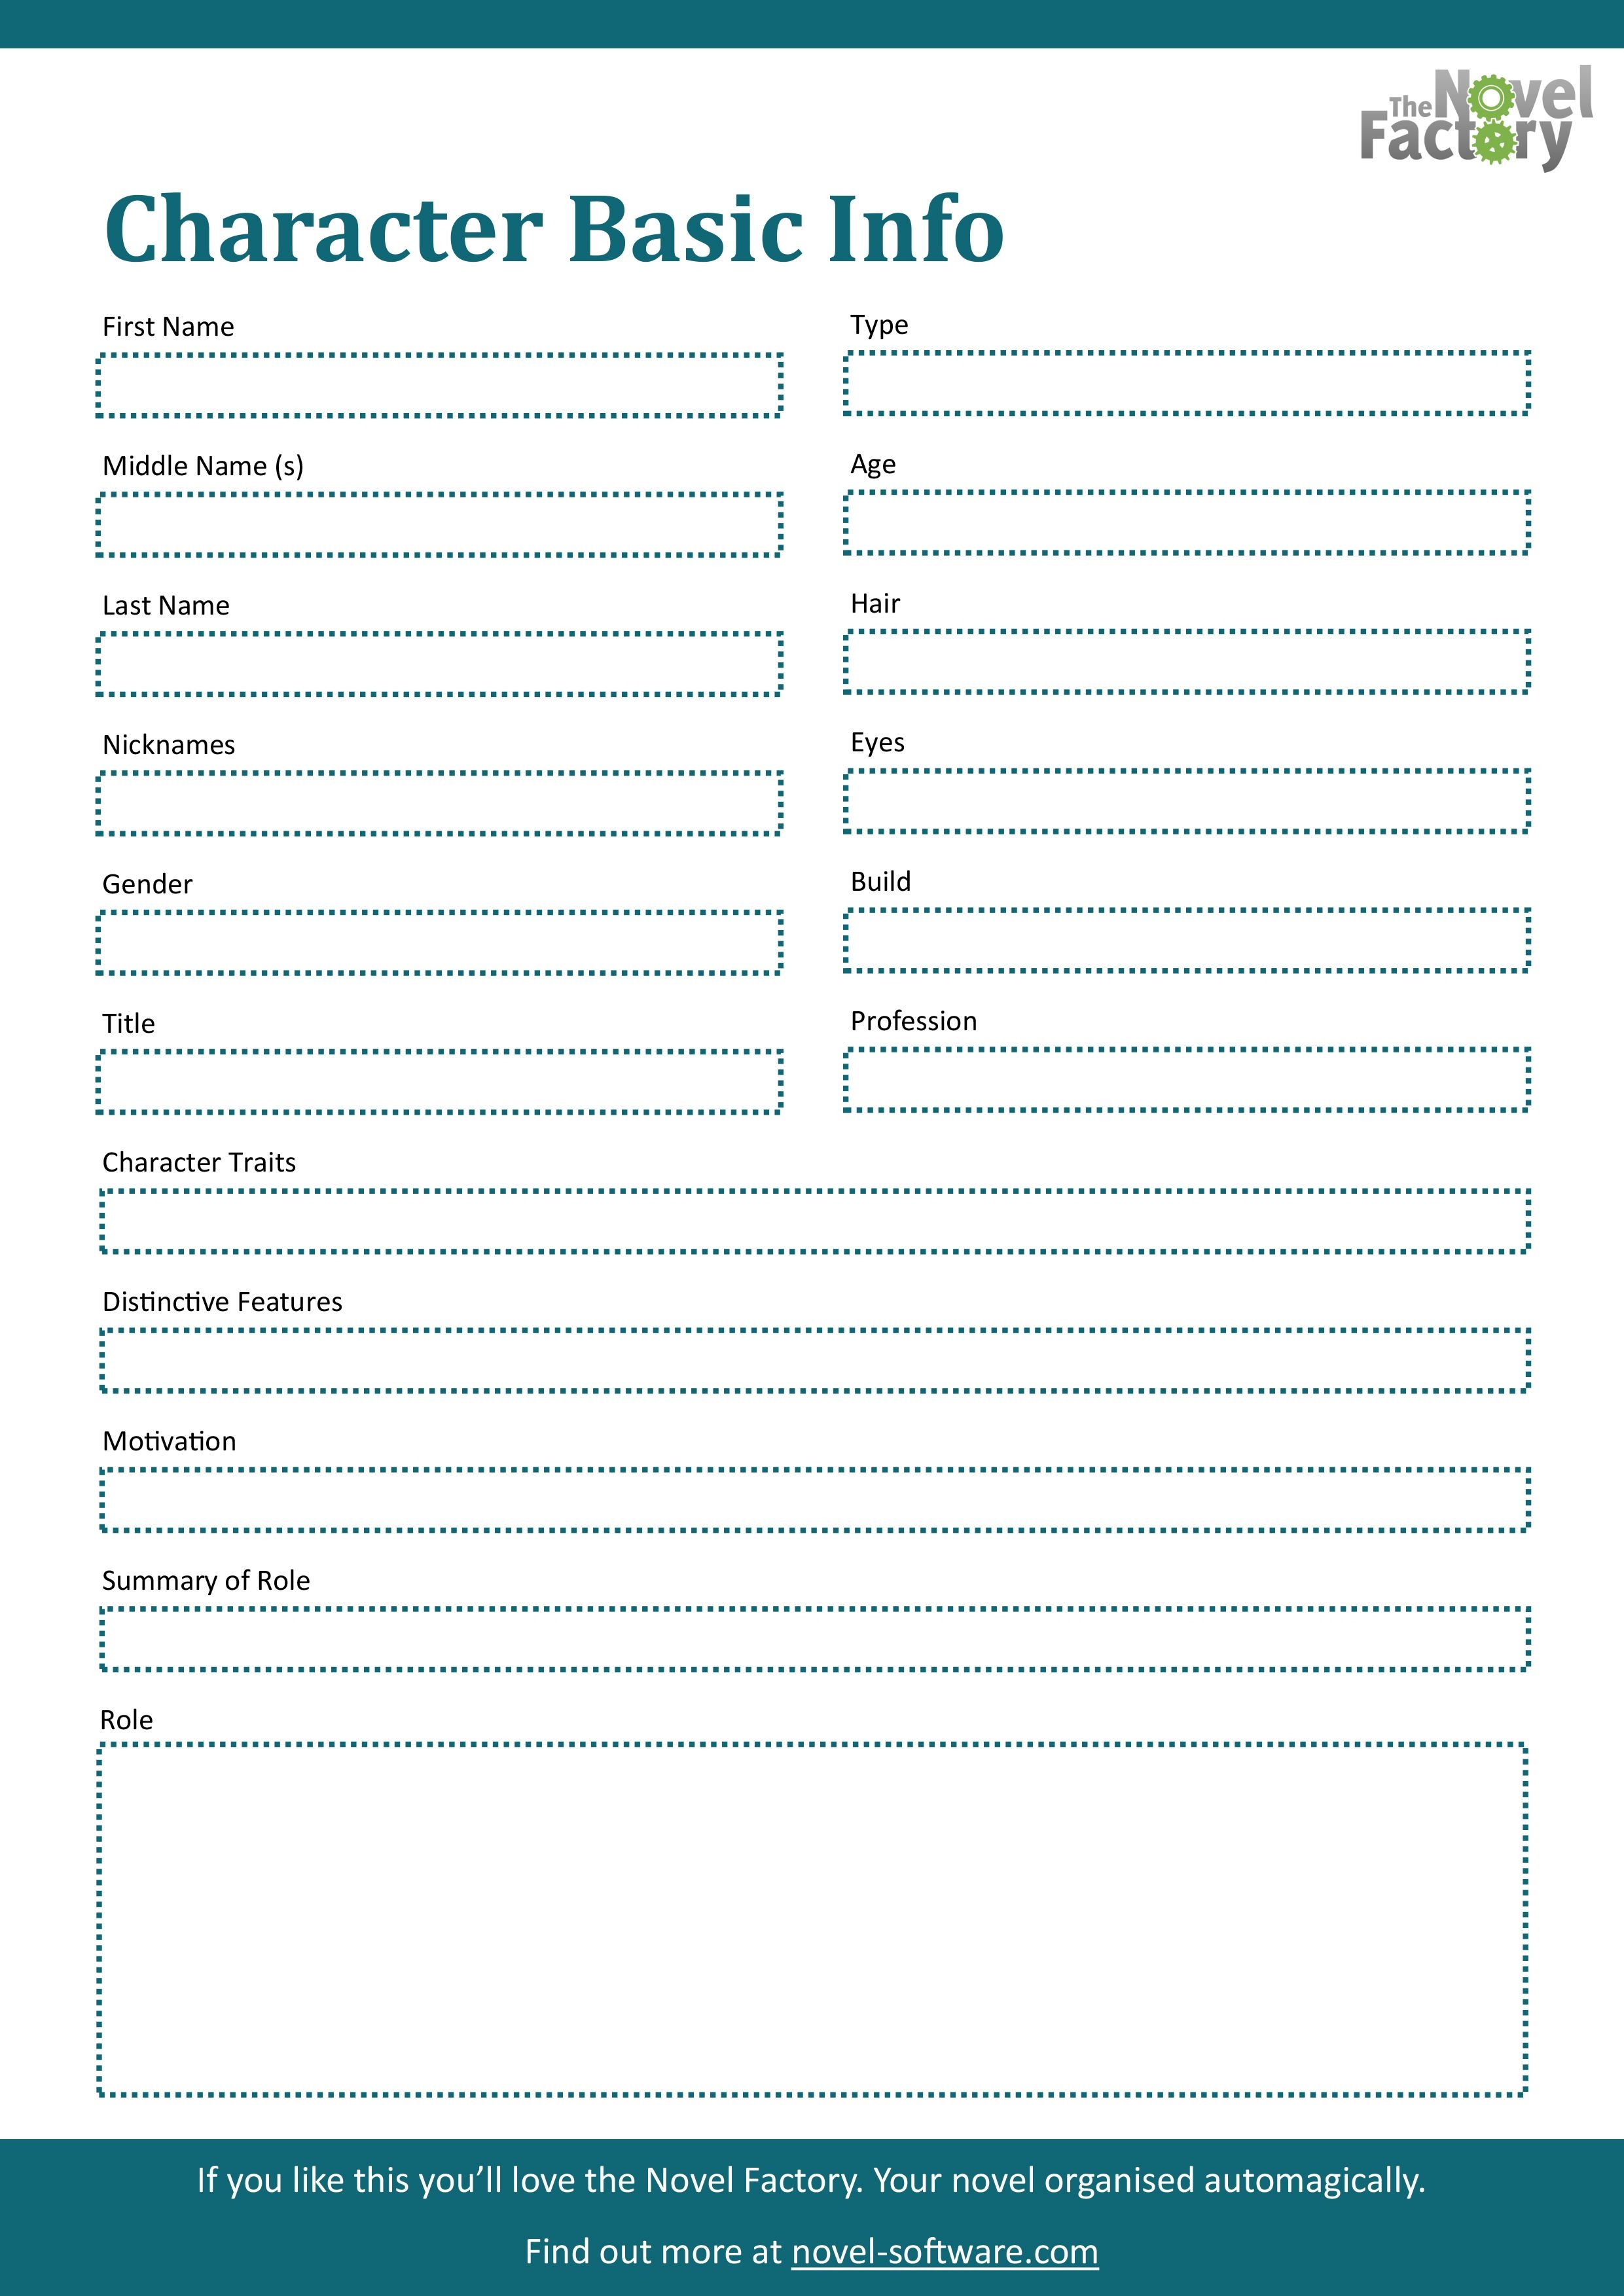 Character Basic Profile Worksheet A Free Downloadable Printable 